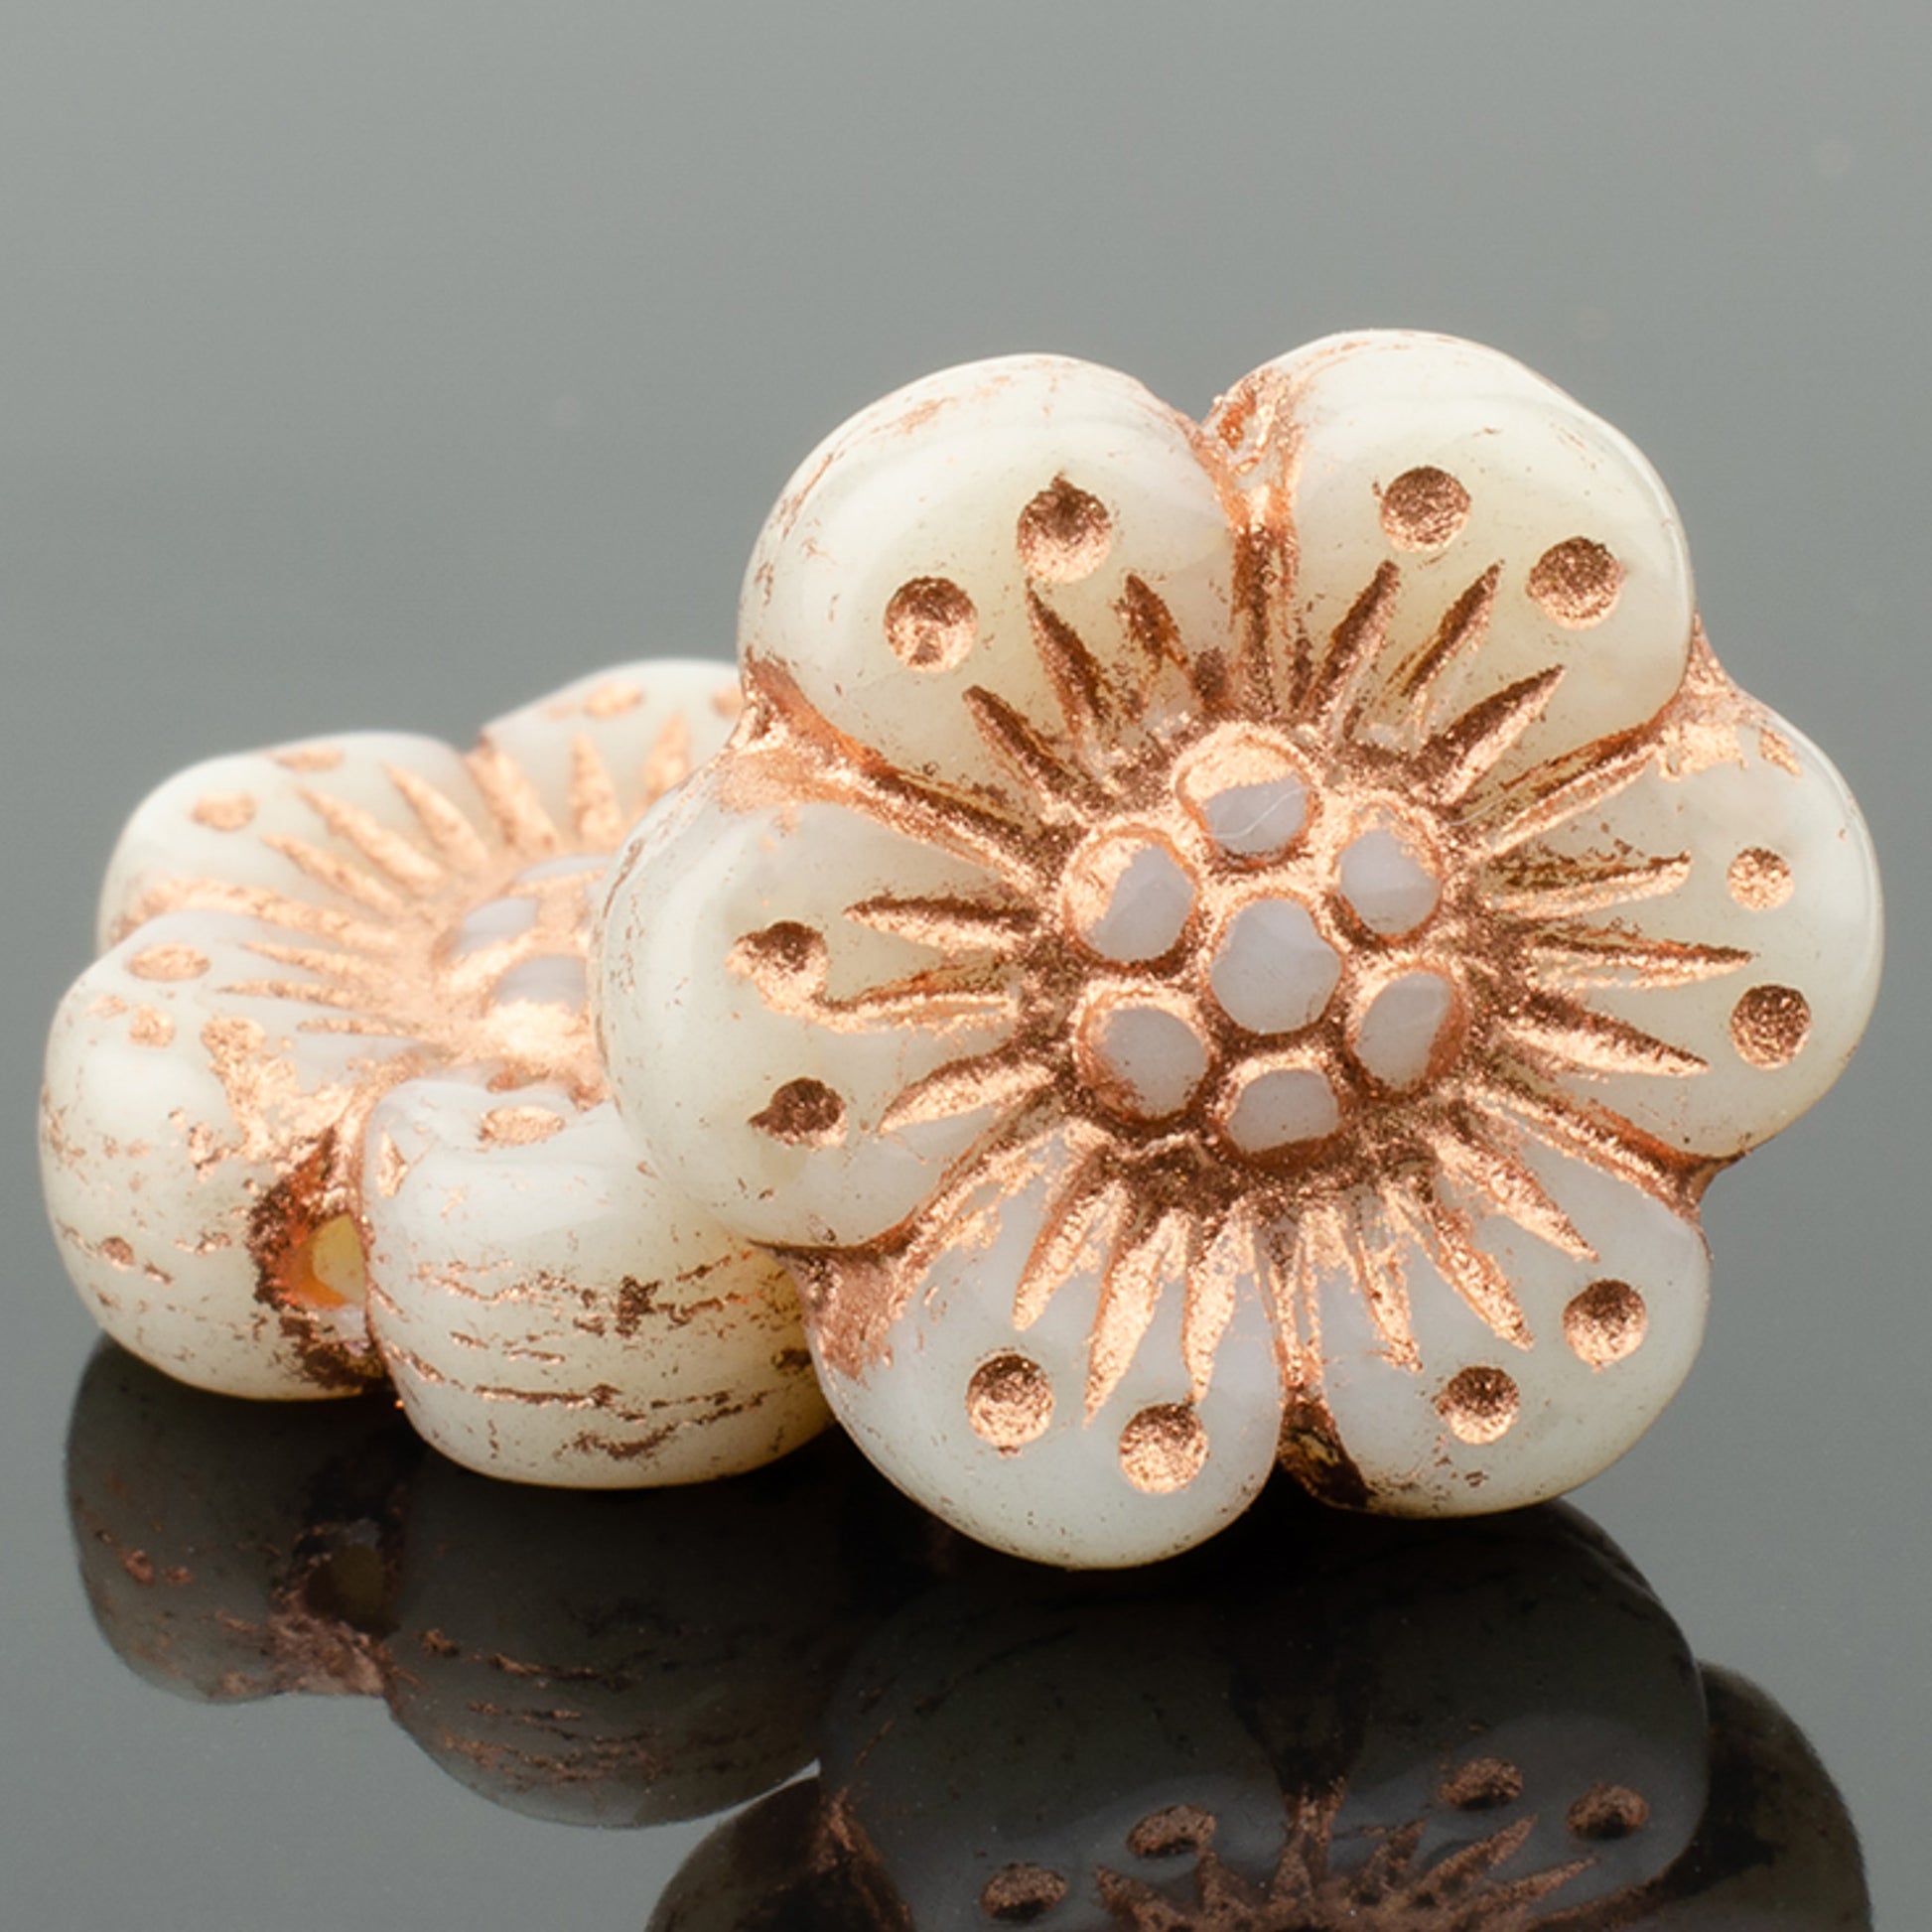 14mm Ivory with Copper Wash Wildflower Glass Bead - 6 pcs.-The Bead Gallery Honolulu